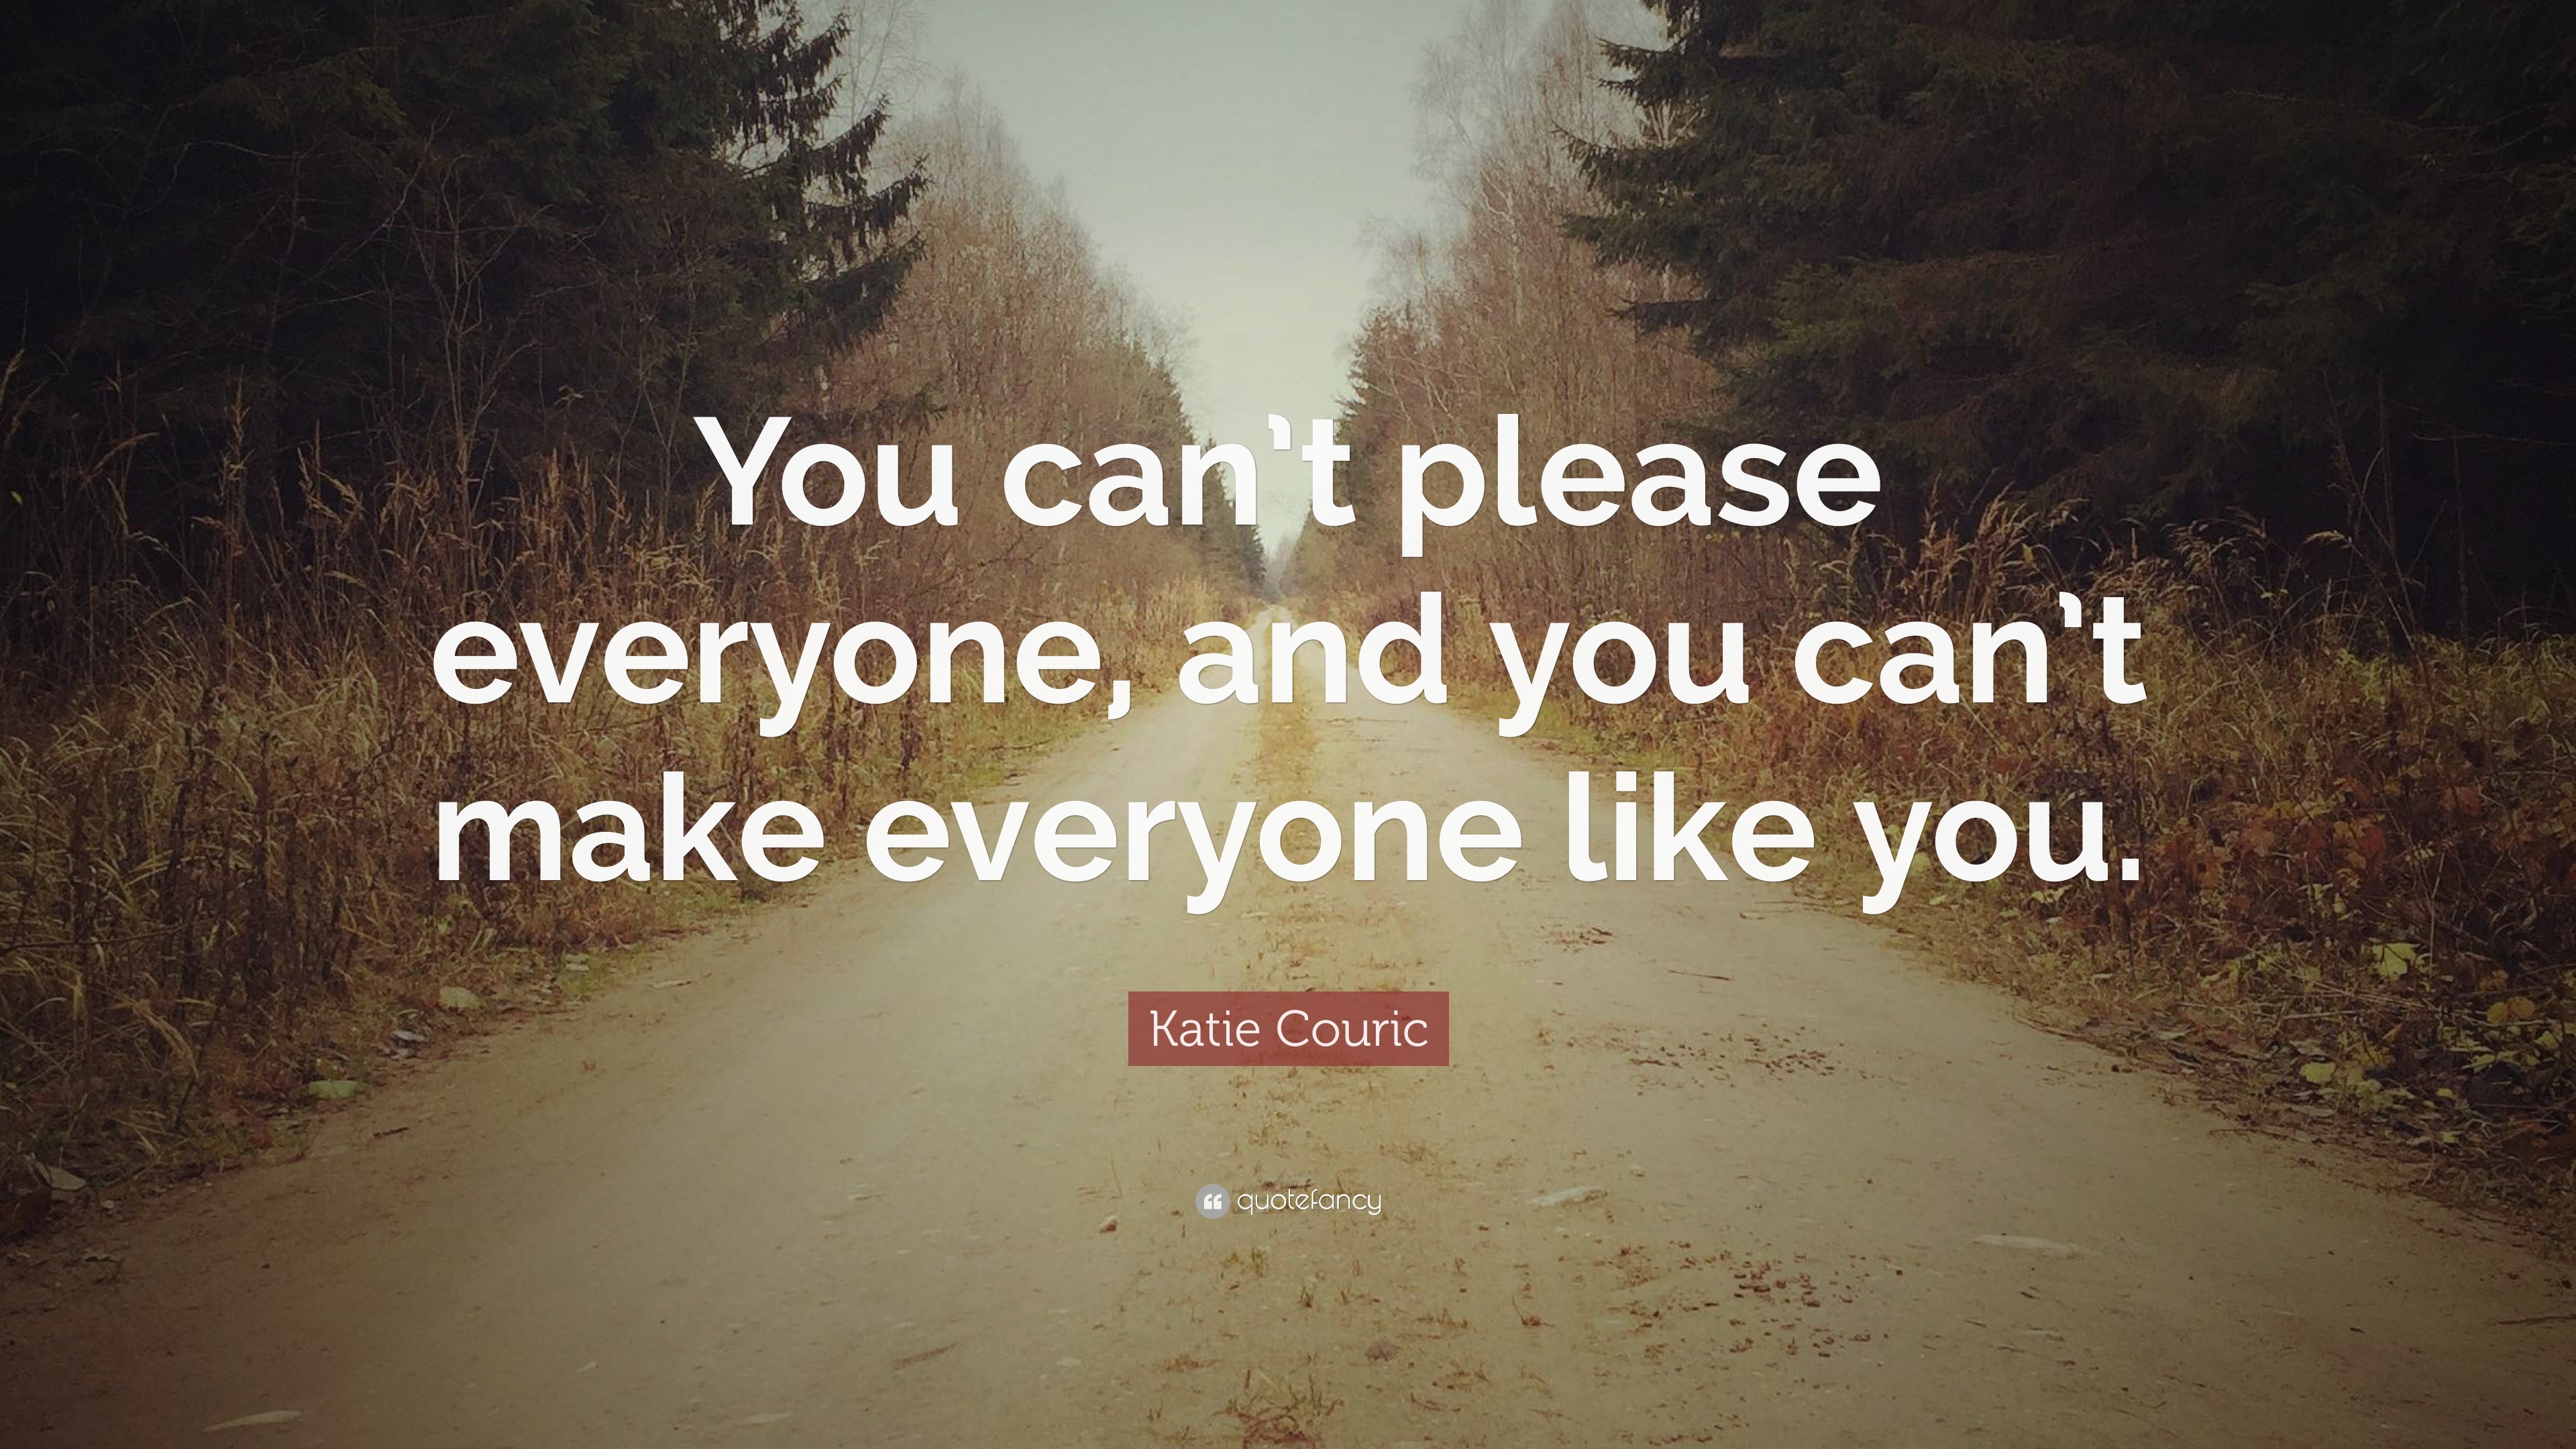 Katie Couric Quote “You can’t please everyone, and you can’t make